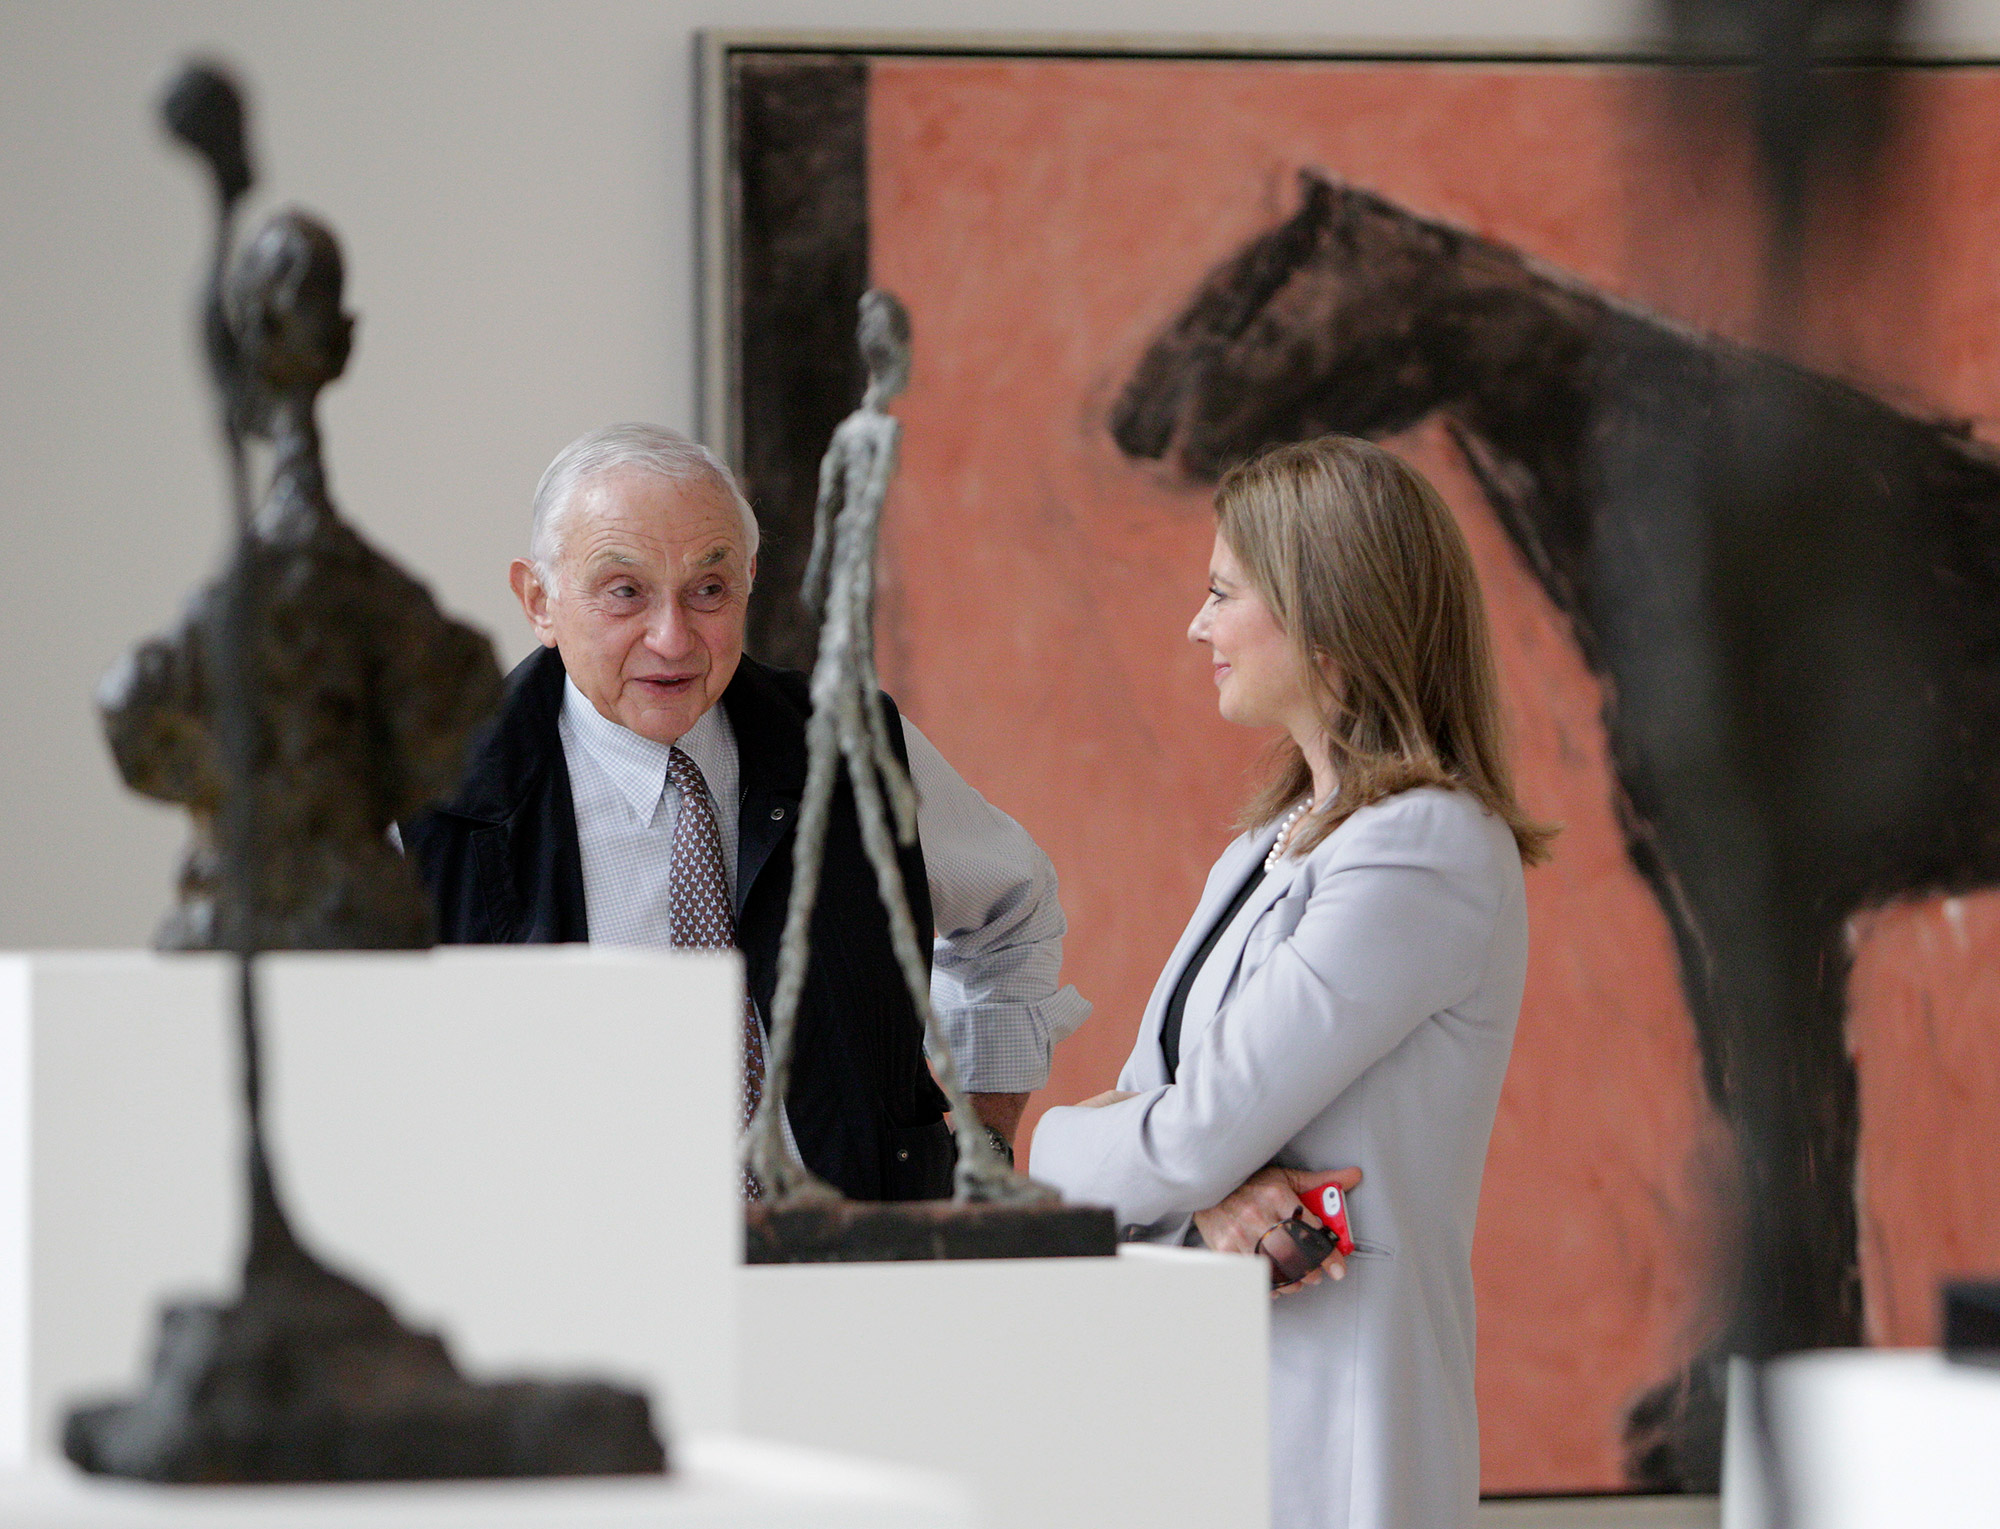 Leslie Wexner tours his art collection at the Wexner Center for the Arts, Columbus, Ohio.